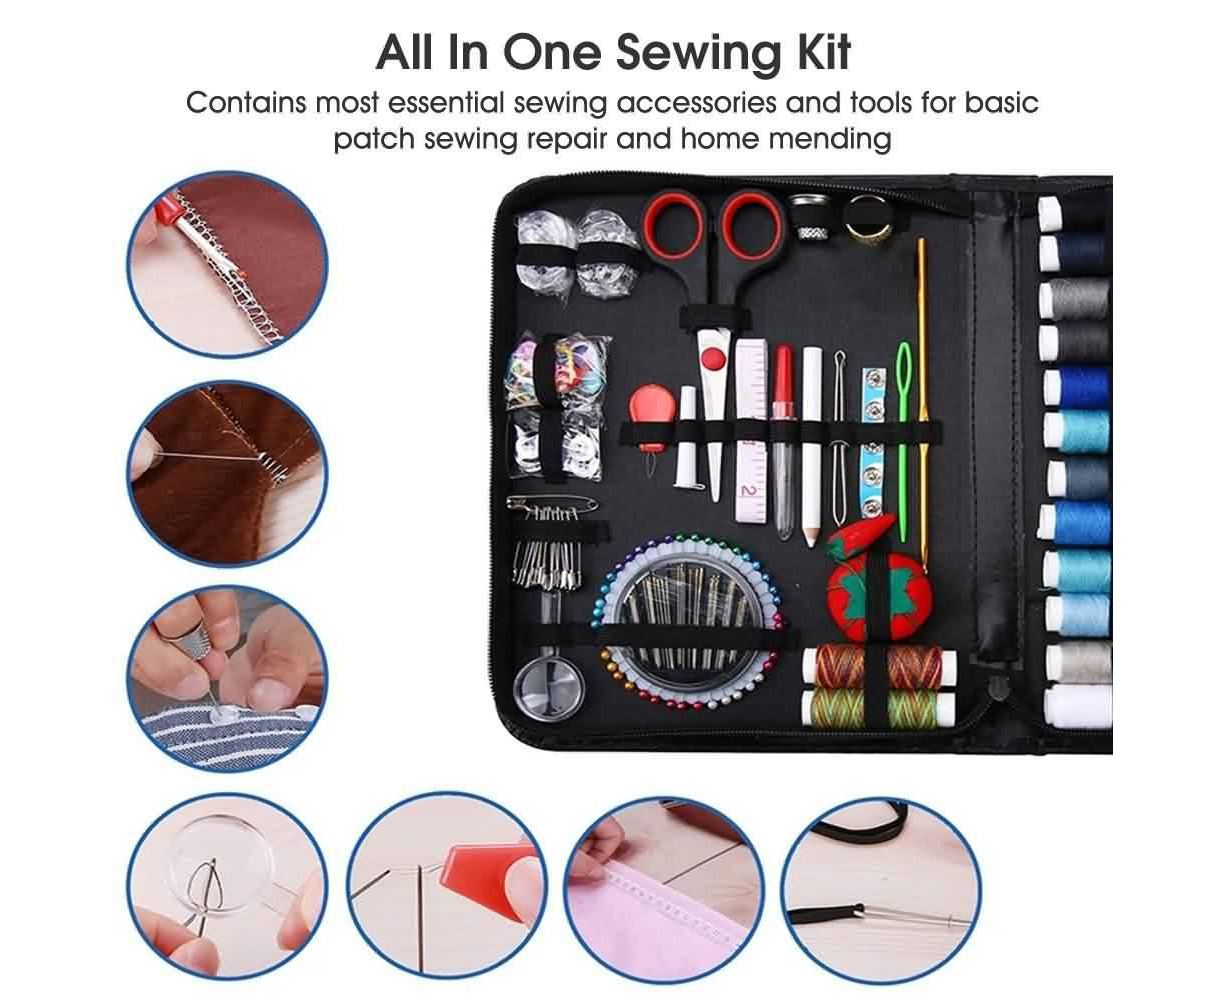 (183 Pcs) ProCase Sewing Project Kit Ideal Gift for Audlt Kids, 38 XL Thread Spools, Scissors, Needles, Pins, for Home, School, Beginner, DIY Sewing